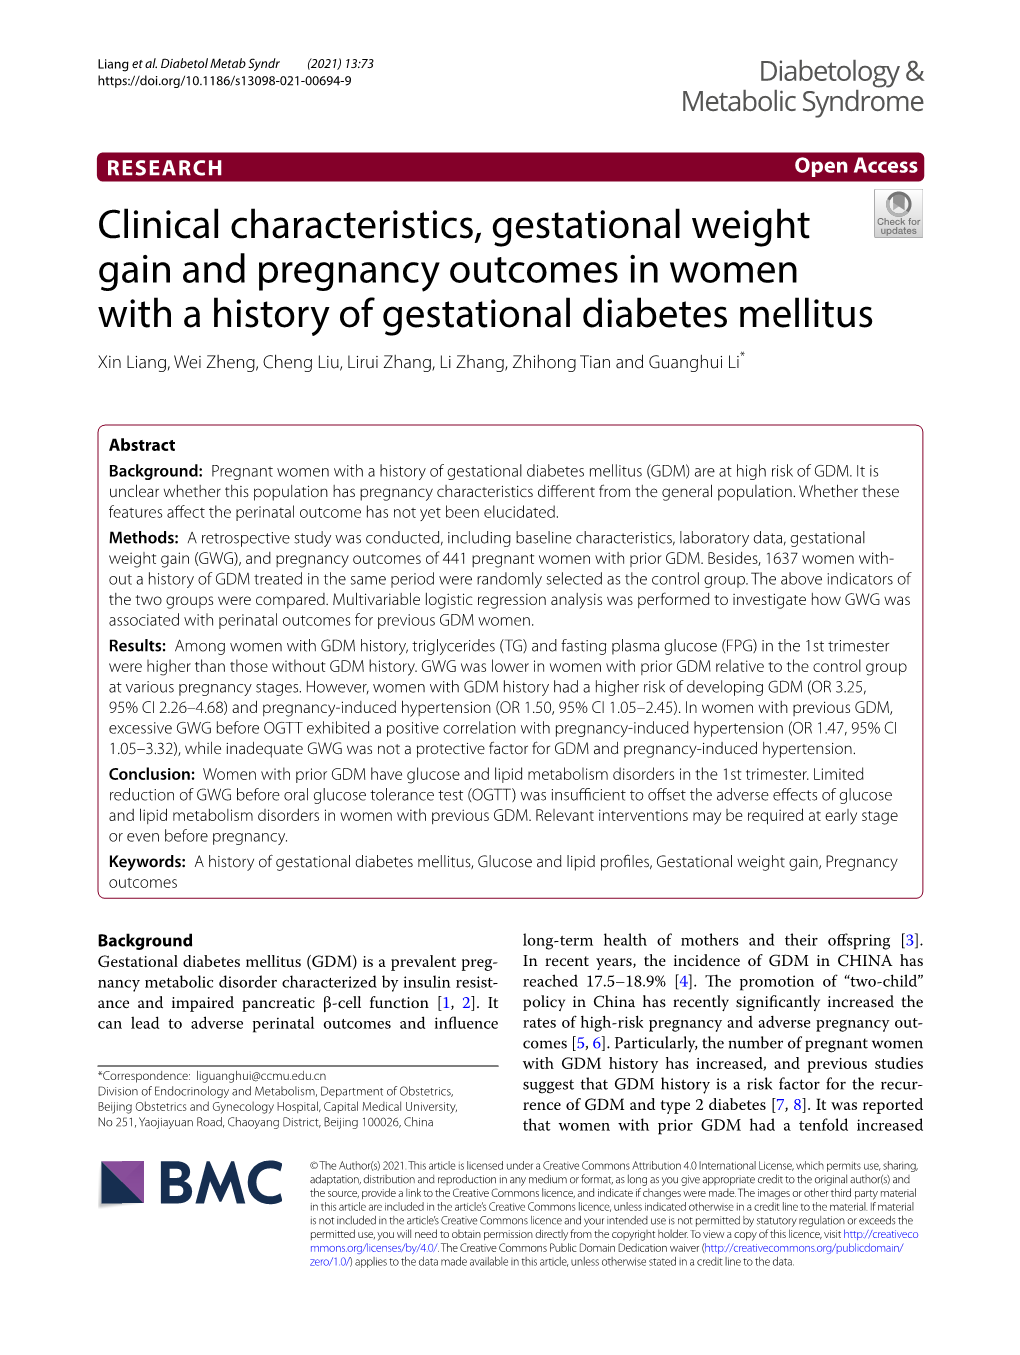 Clinical Characteristics, Gestational Weight Gain and Pregnancy